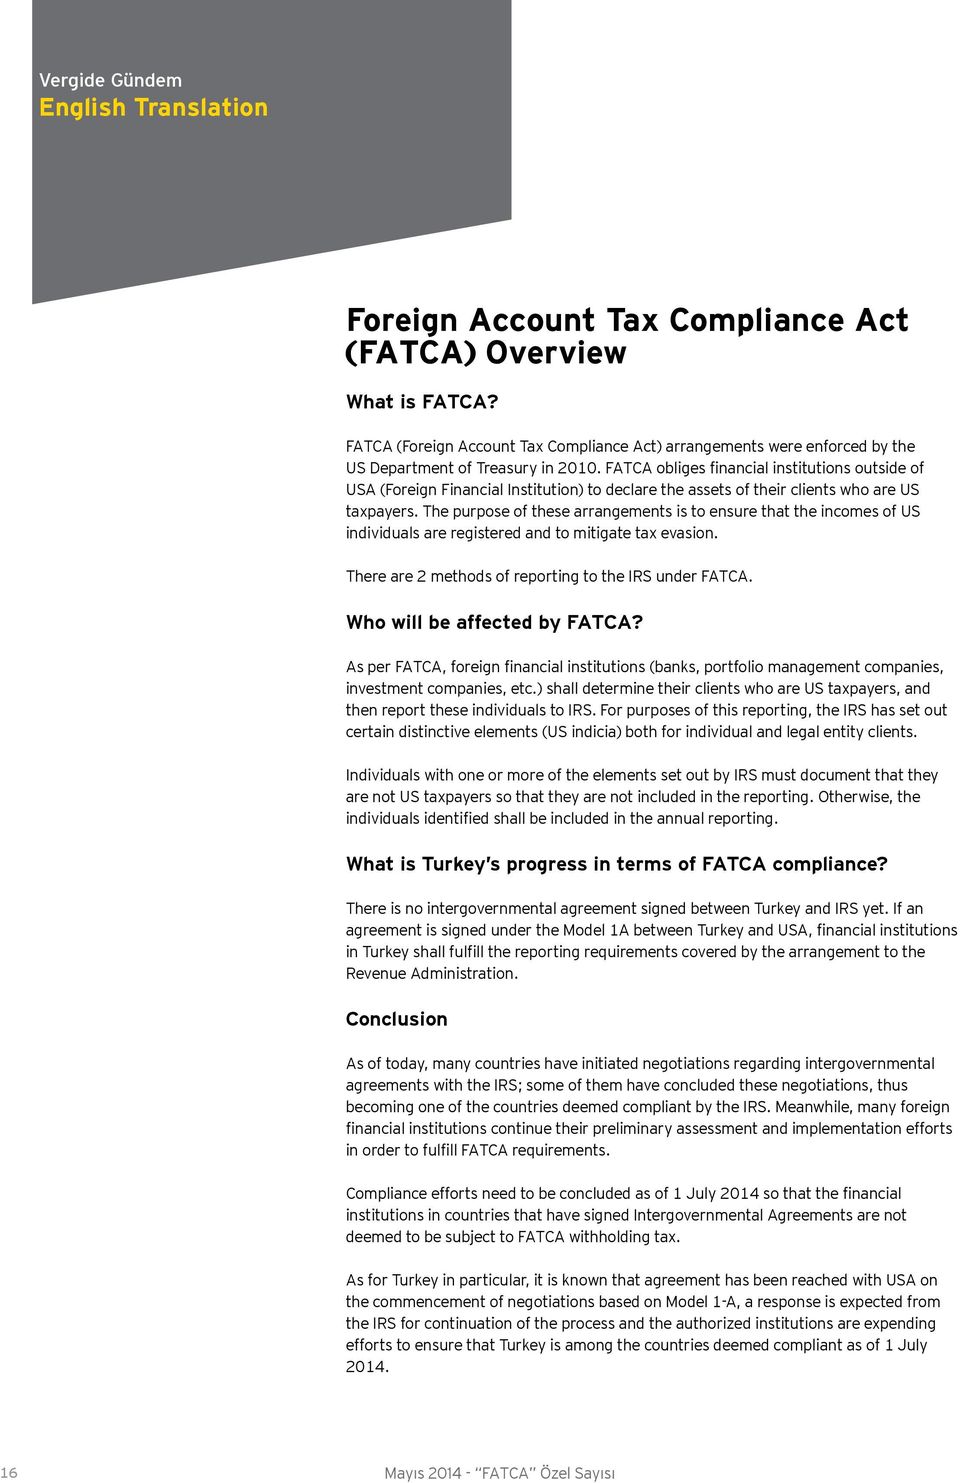 FATCA obliges financial institutions outside of USA (Foreign Financial Institution) to declare the assets of their clients who are US taxpayers.